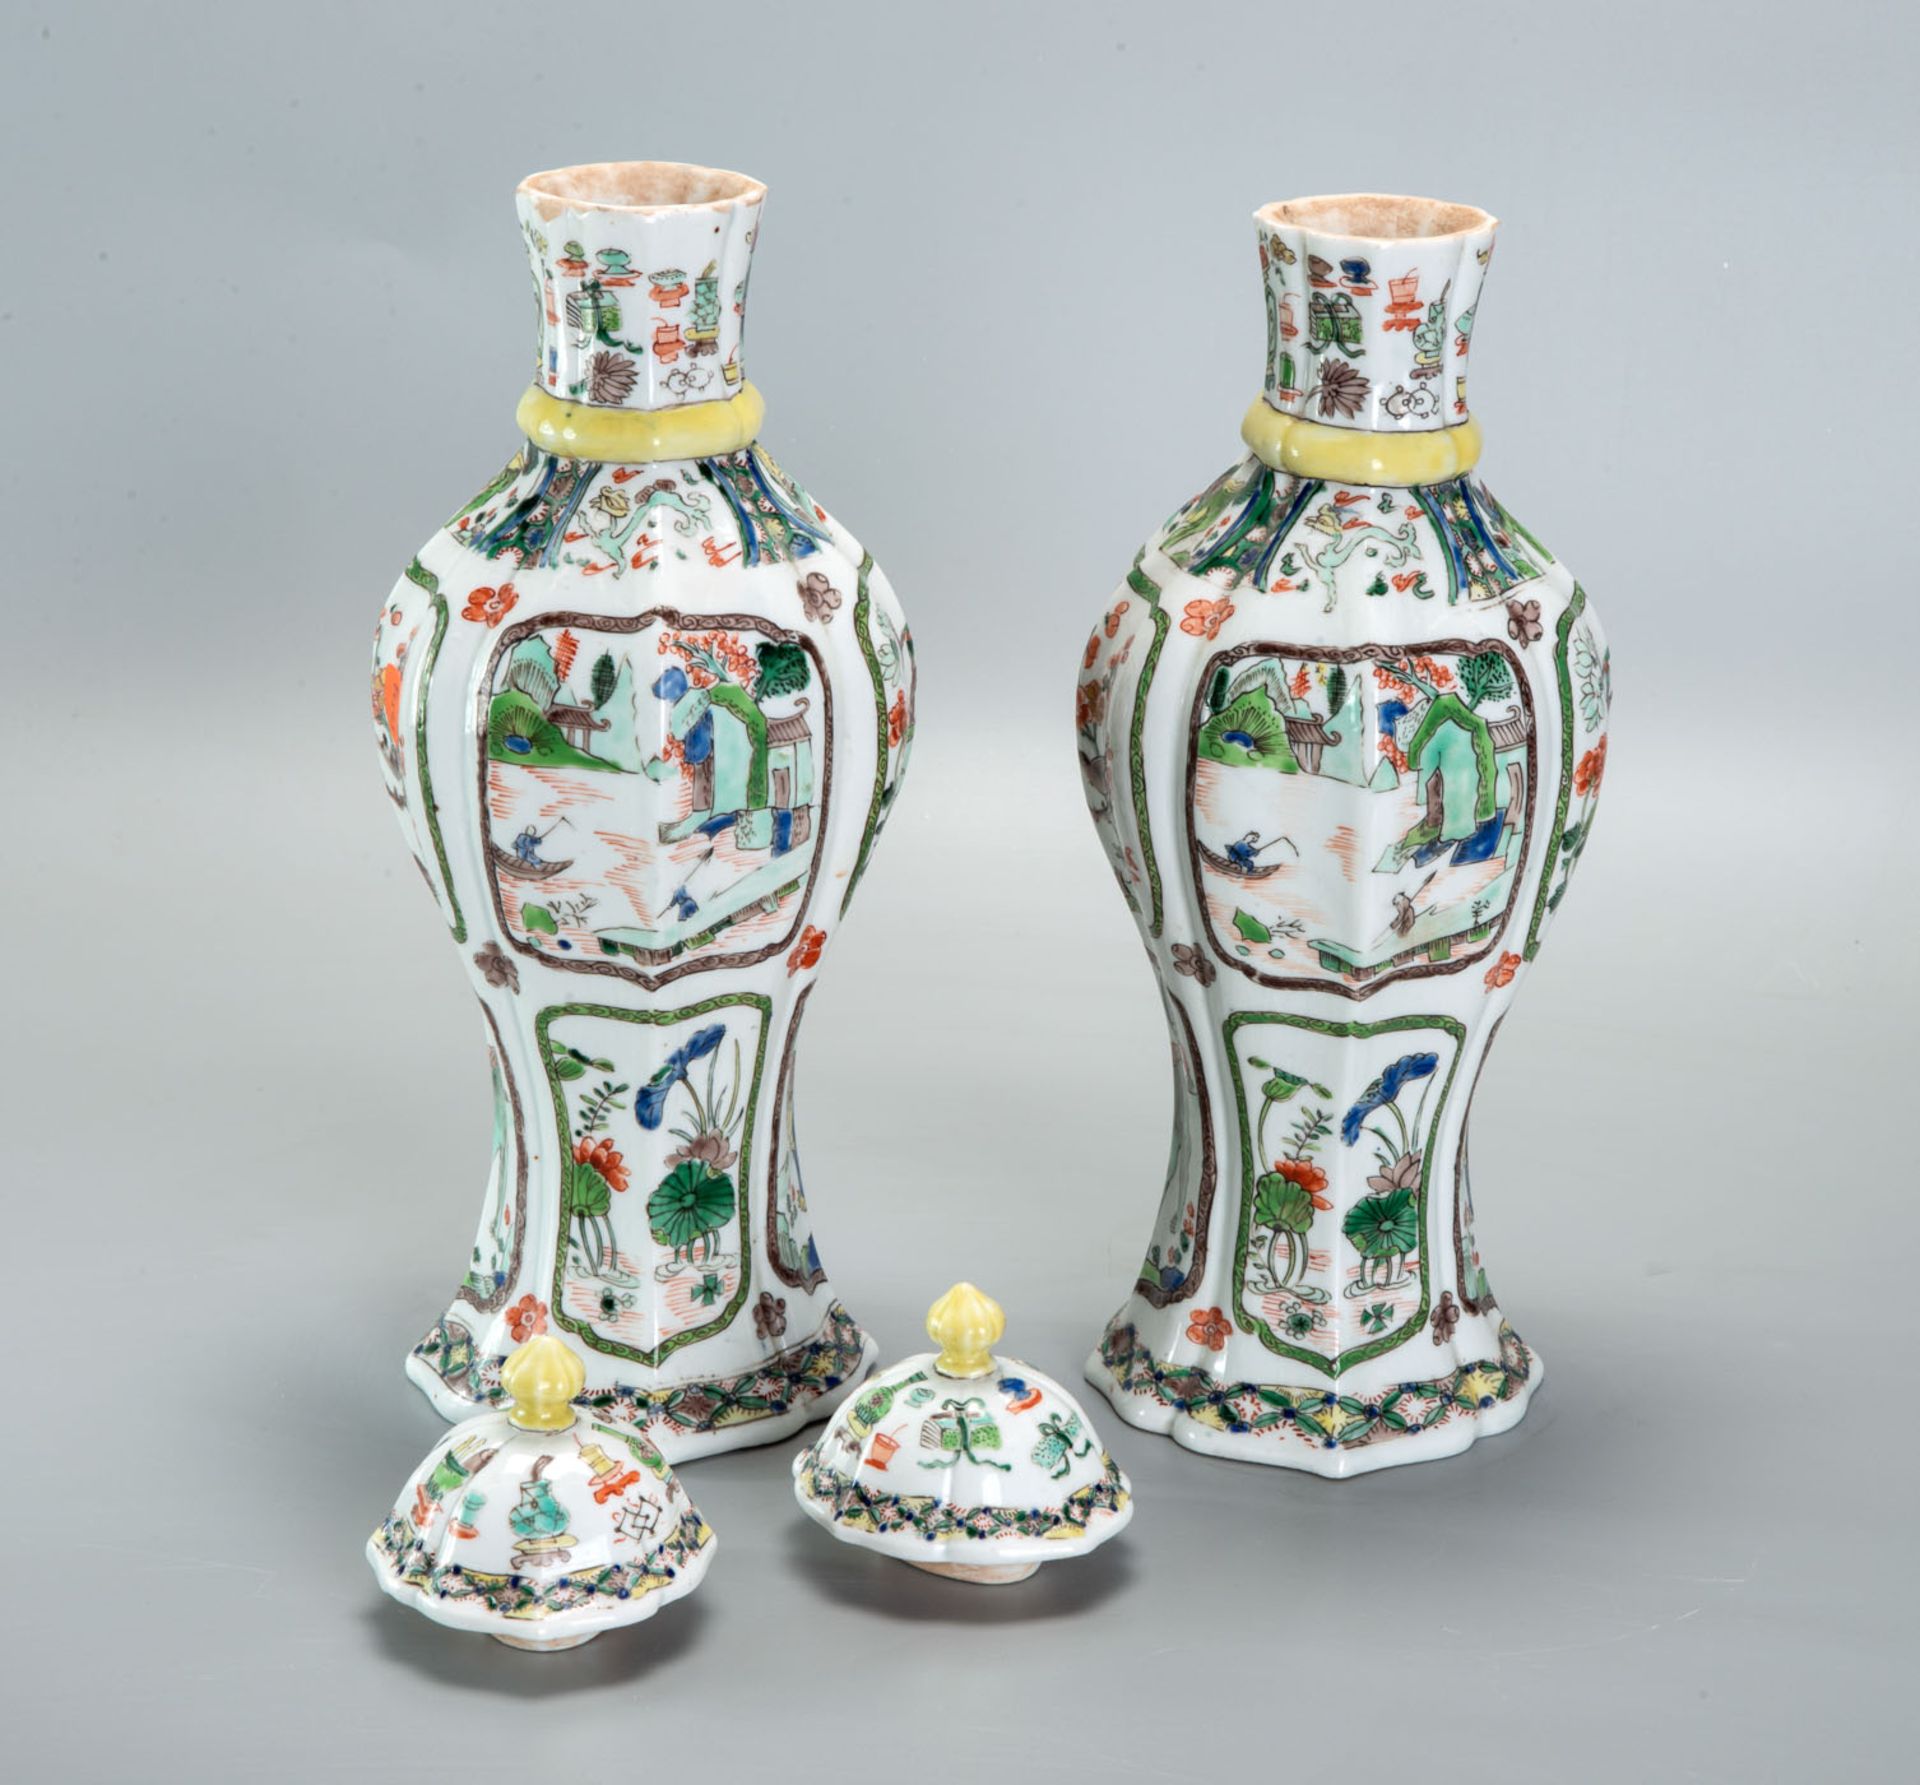 A Pair of Wucai Stoneware Lidded Vases, China, Qing Dynasty, 18th Century - Image 5 of 6